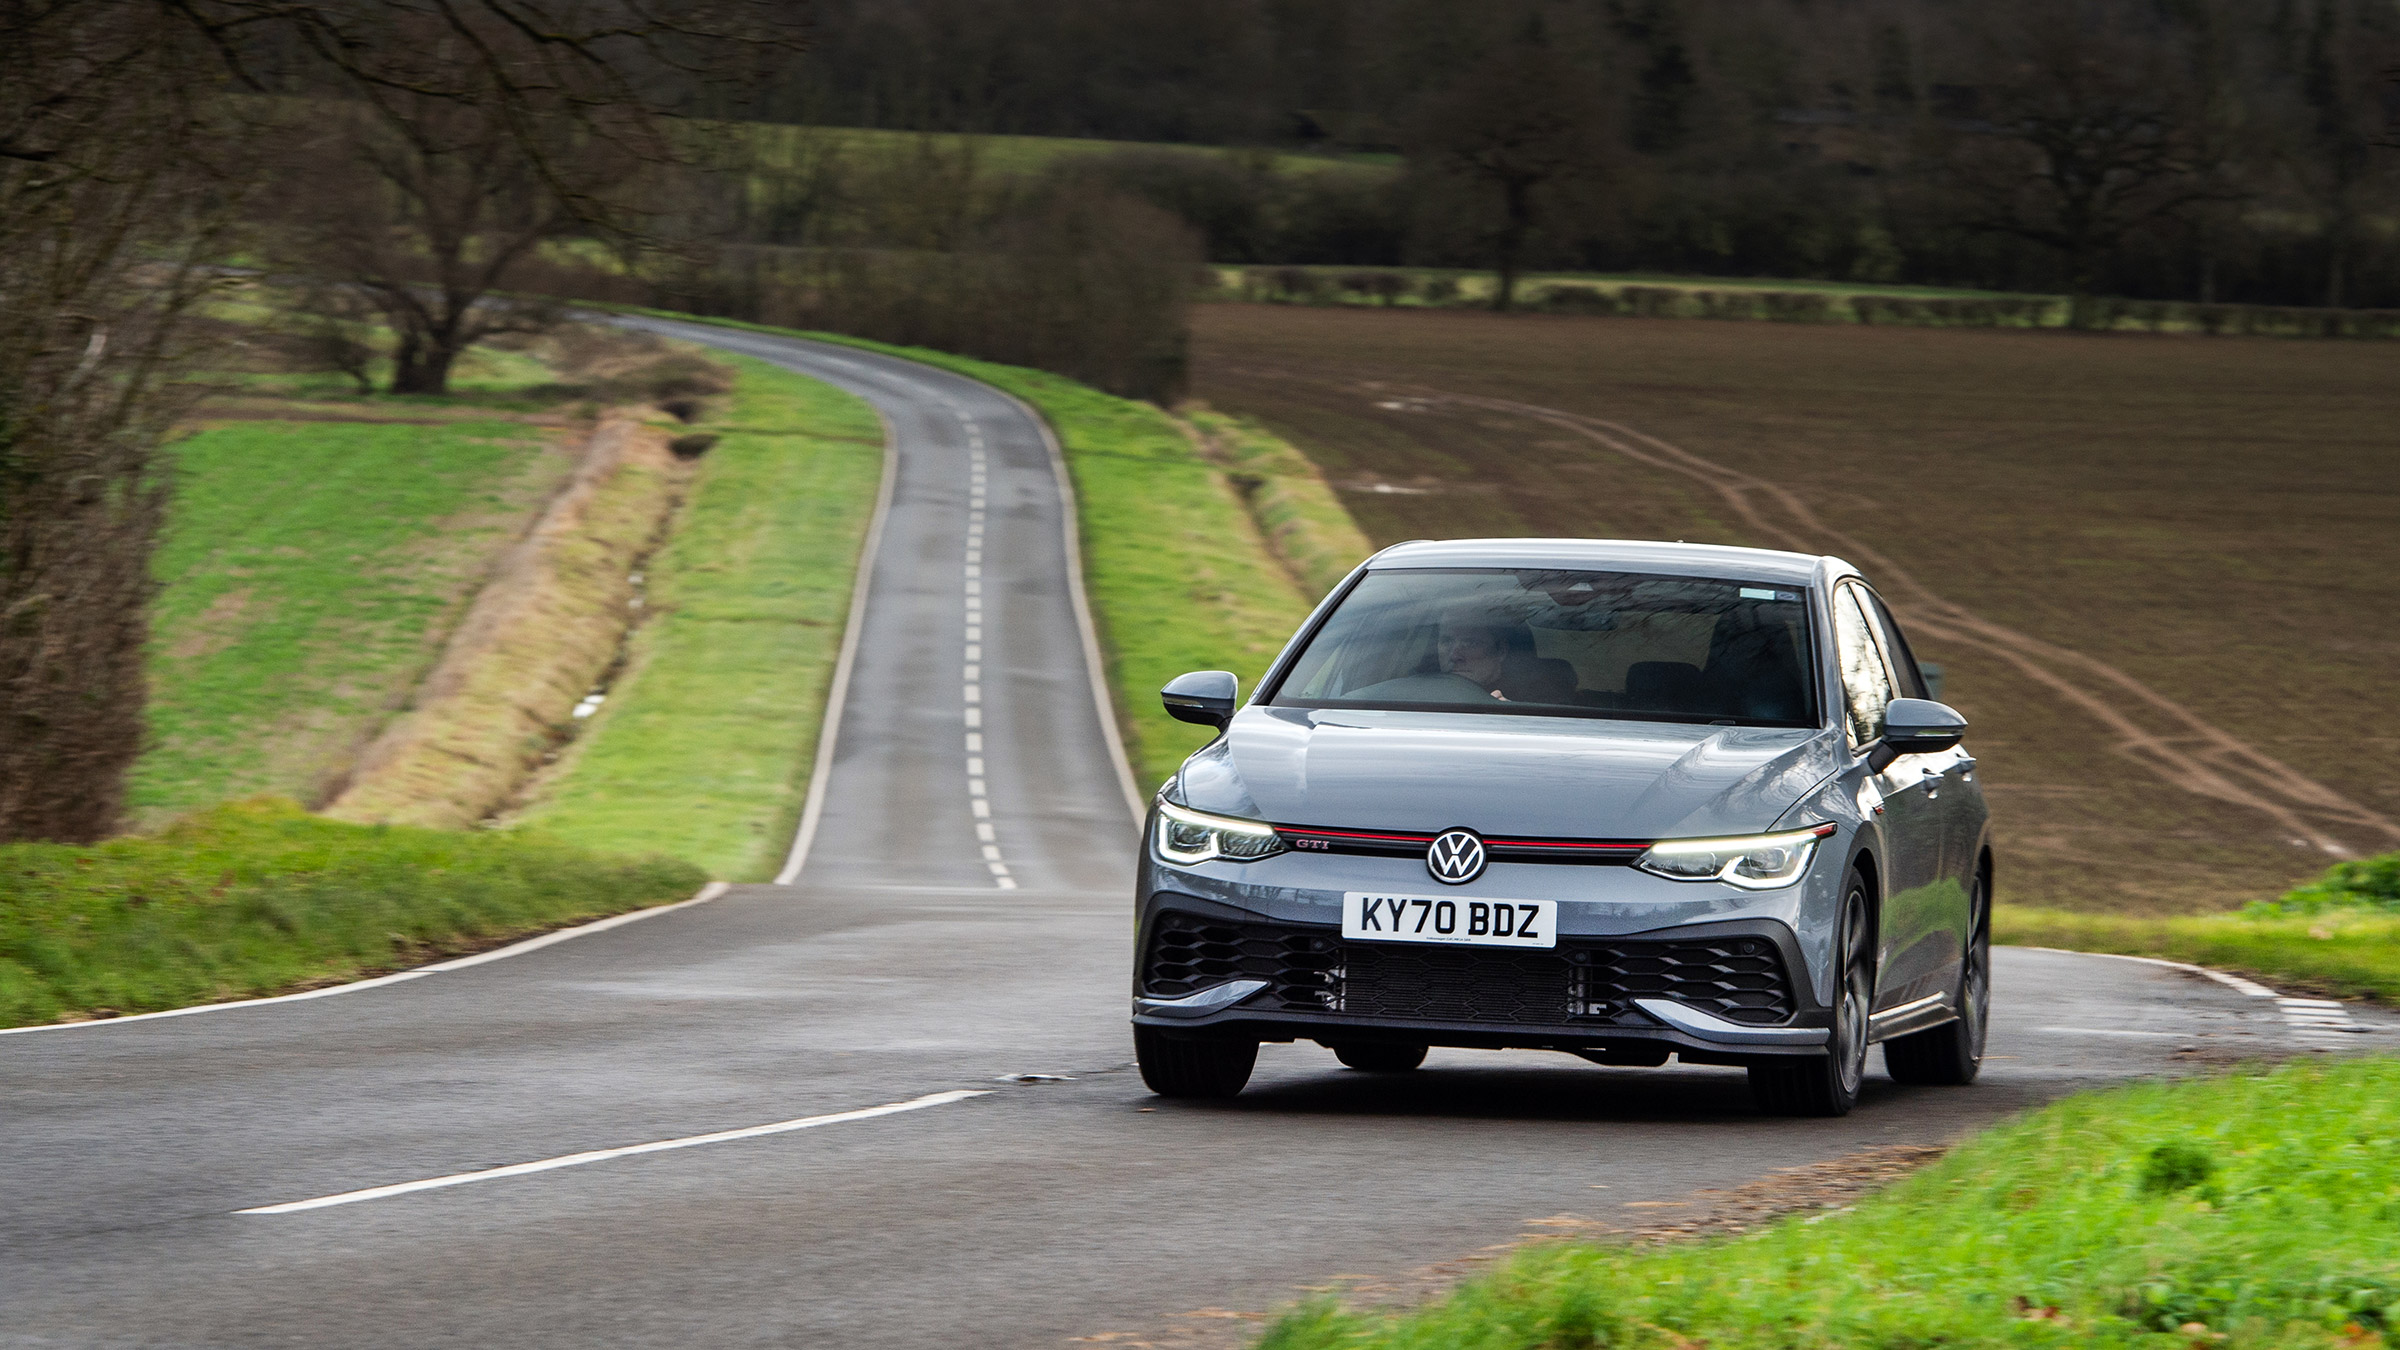 Volkswagen Golf Gti Clubsport 21 Review Has The Honda Civic Type R Been Usurped Evo